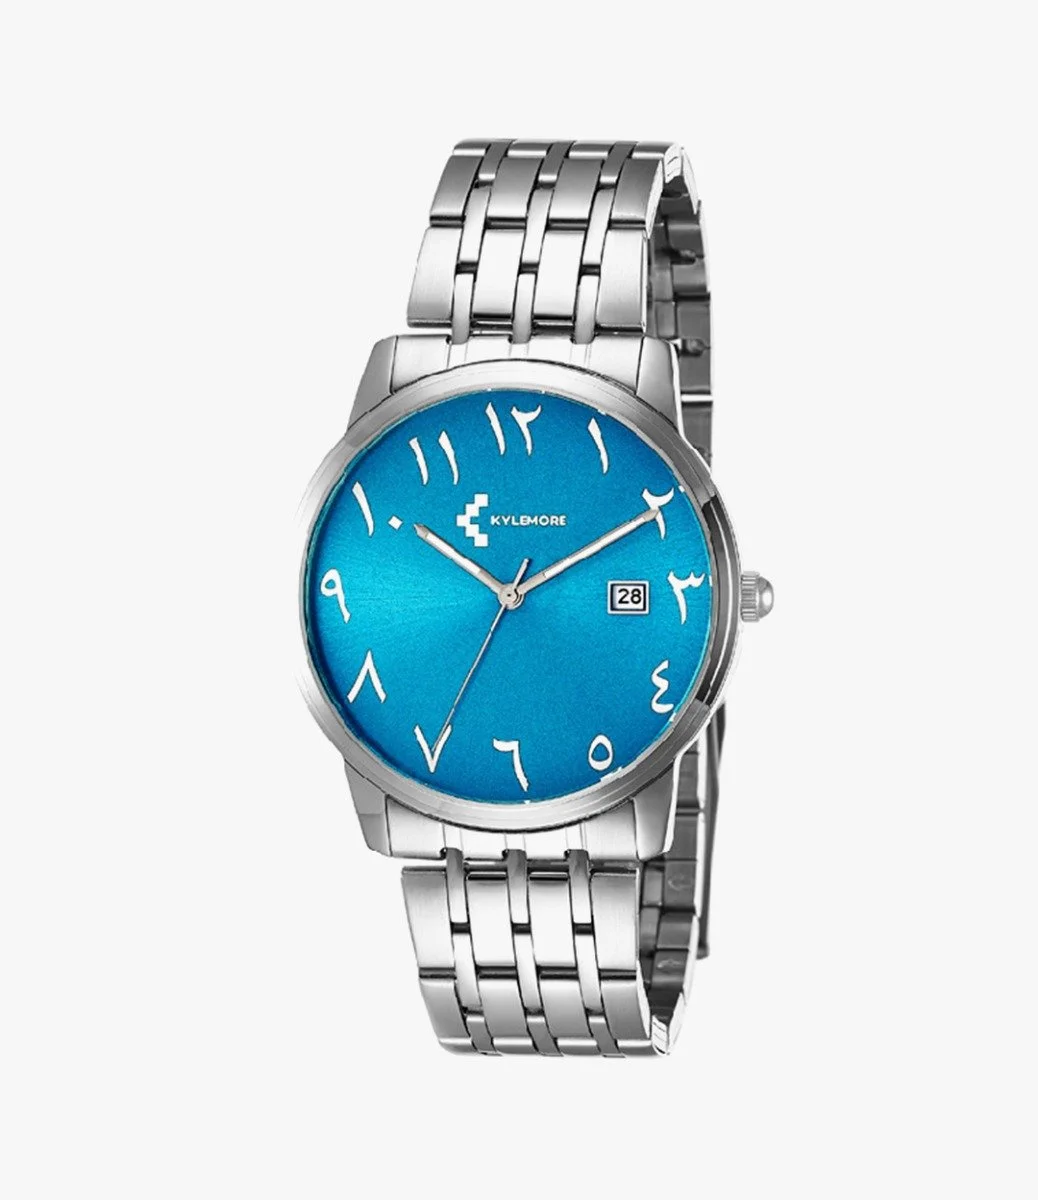 The Stainless Steel Light Blue Kylemore Watch With Arabic Numbers